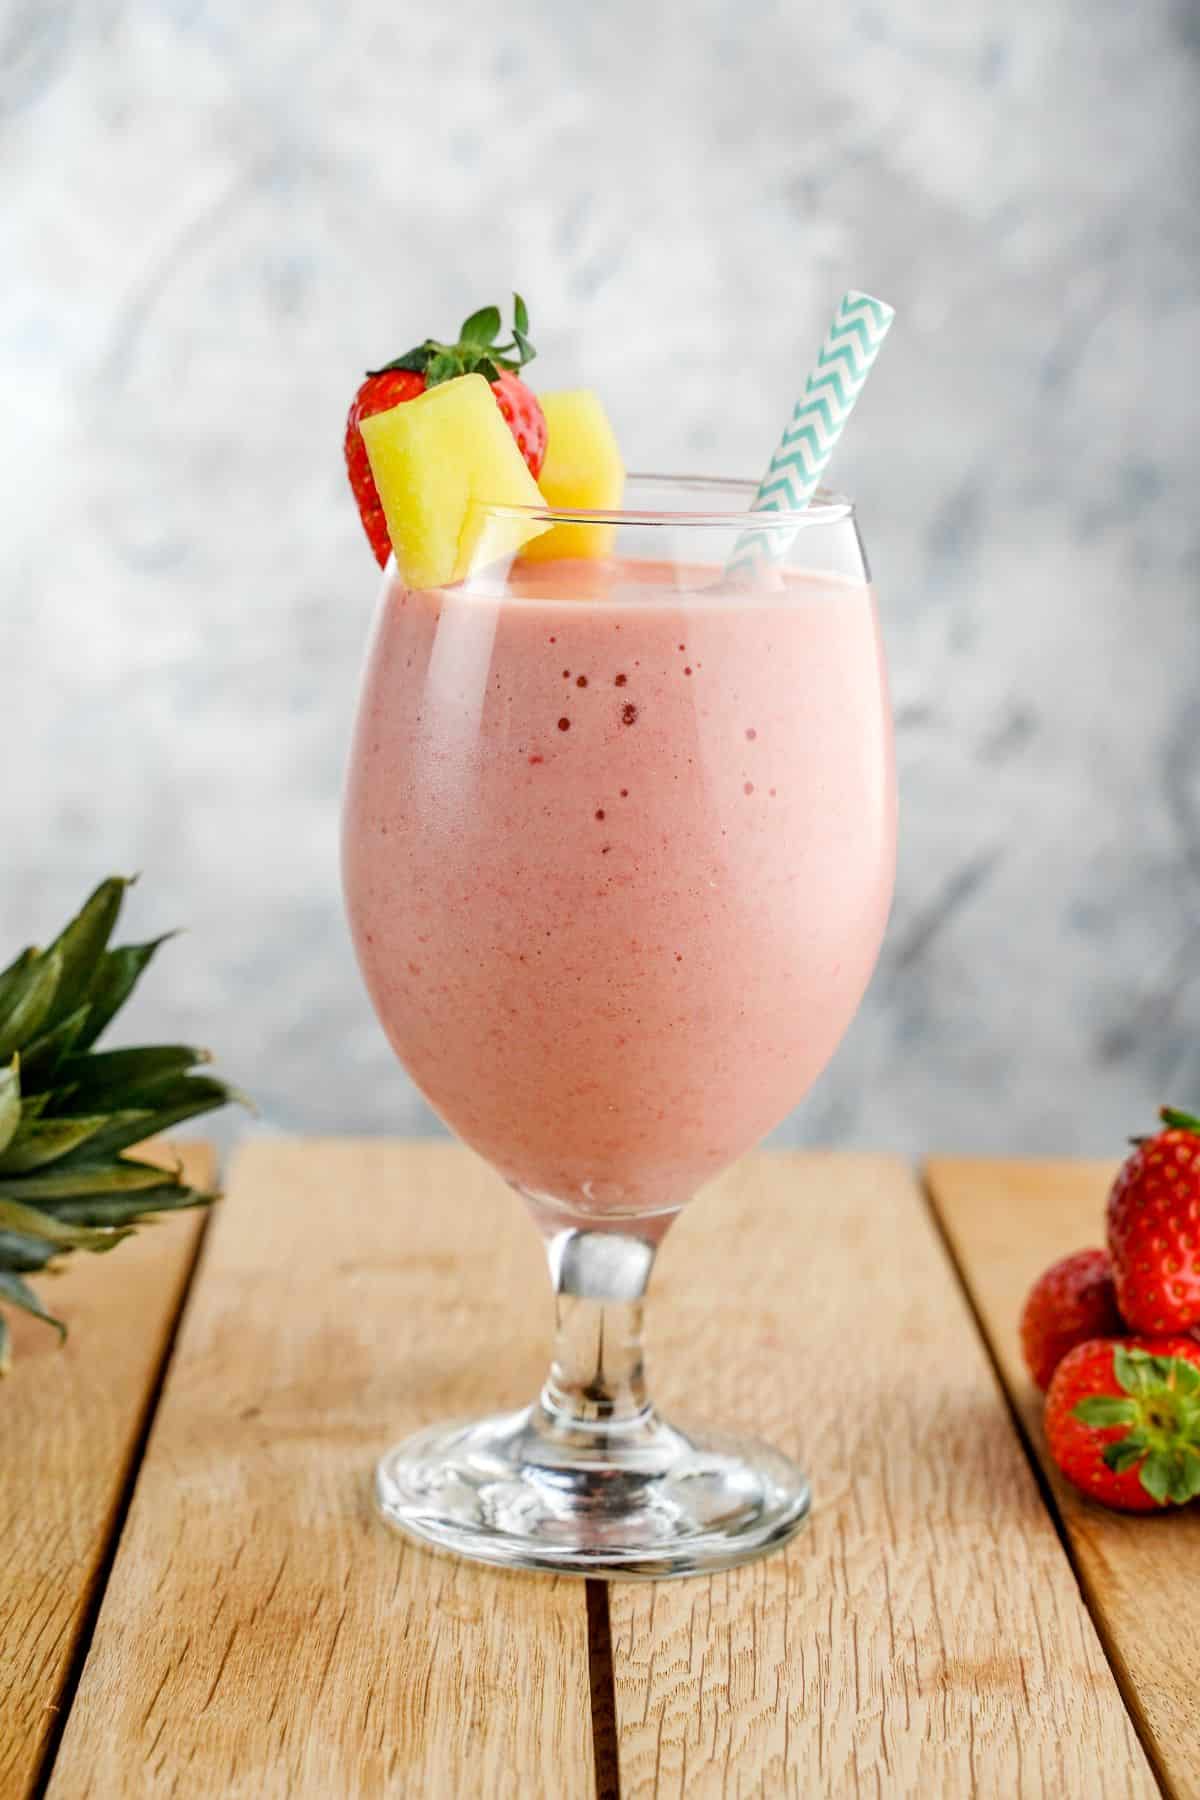 A close-up of a Strawberry Pineapple Smoothie in a tall glass with a straw nad piece of a strawberry and a pineapple.